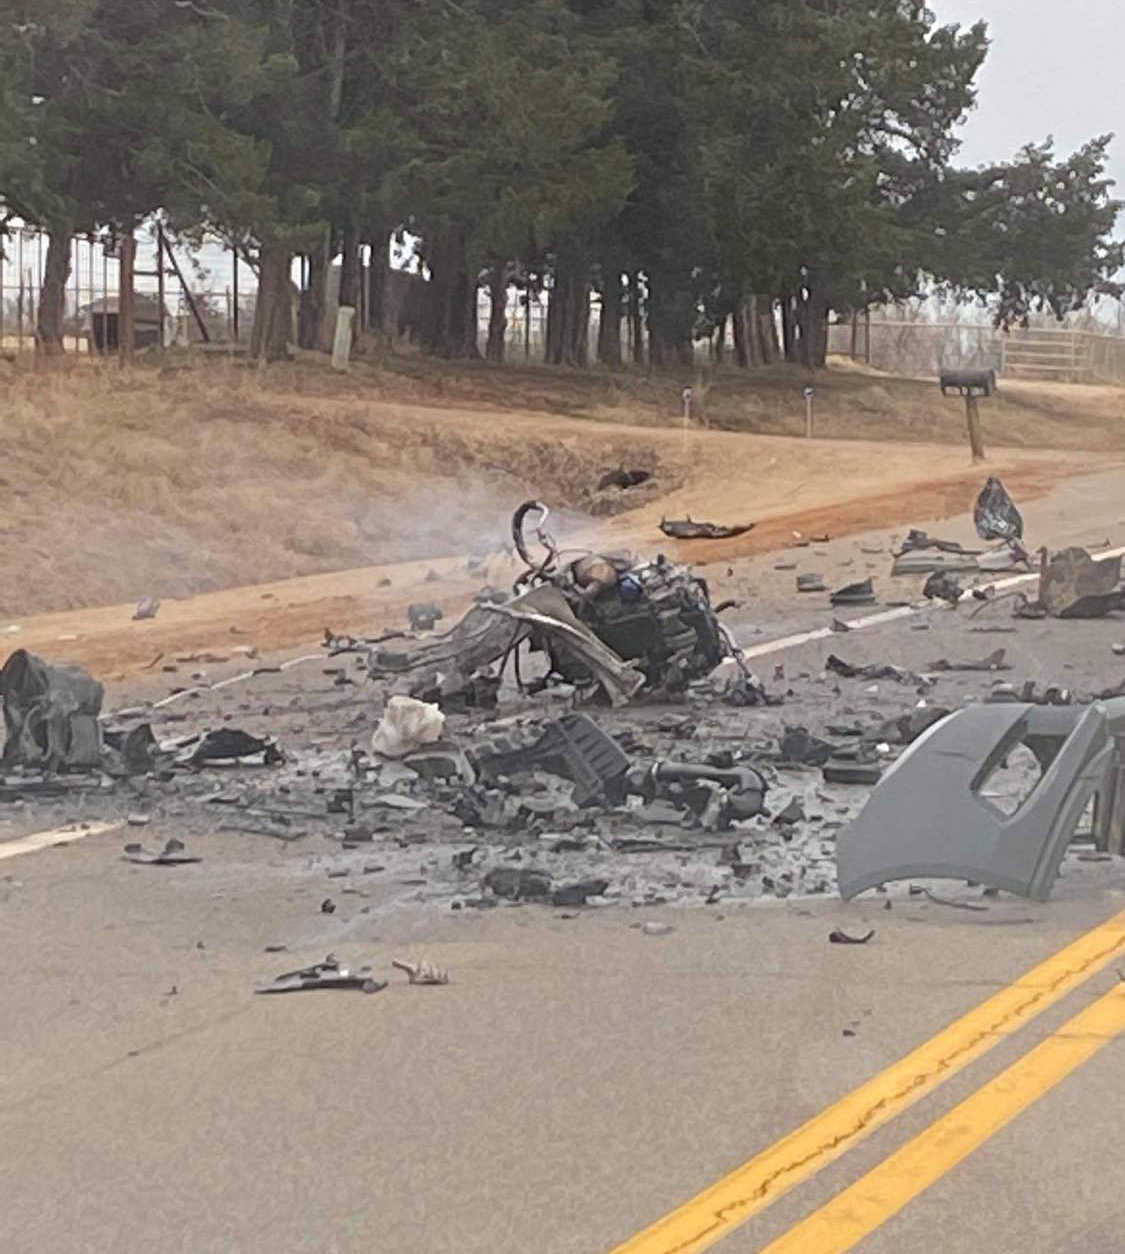 Highway 33 Shut Down For Reported Fatality Accident Guthrie News Page